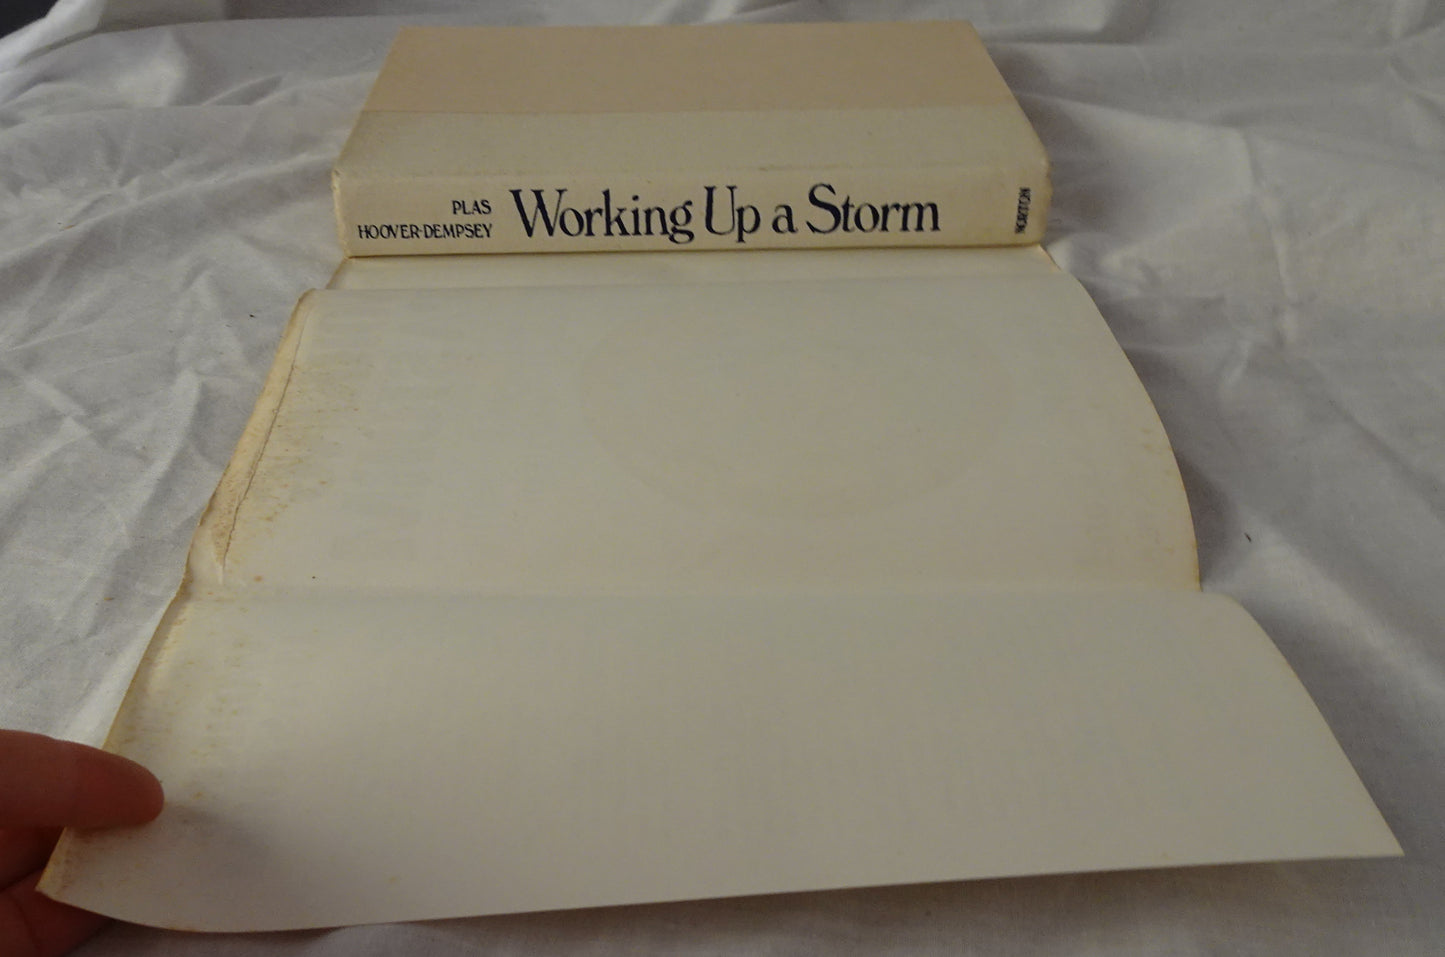 Working Up a Storm by Jeanne M. Plas and Kathleen V. Hoover-Dempsey